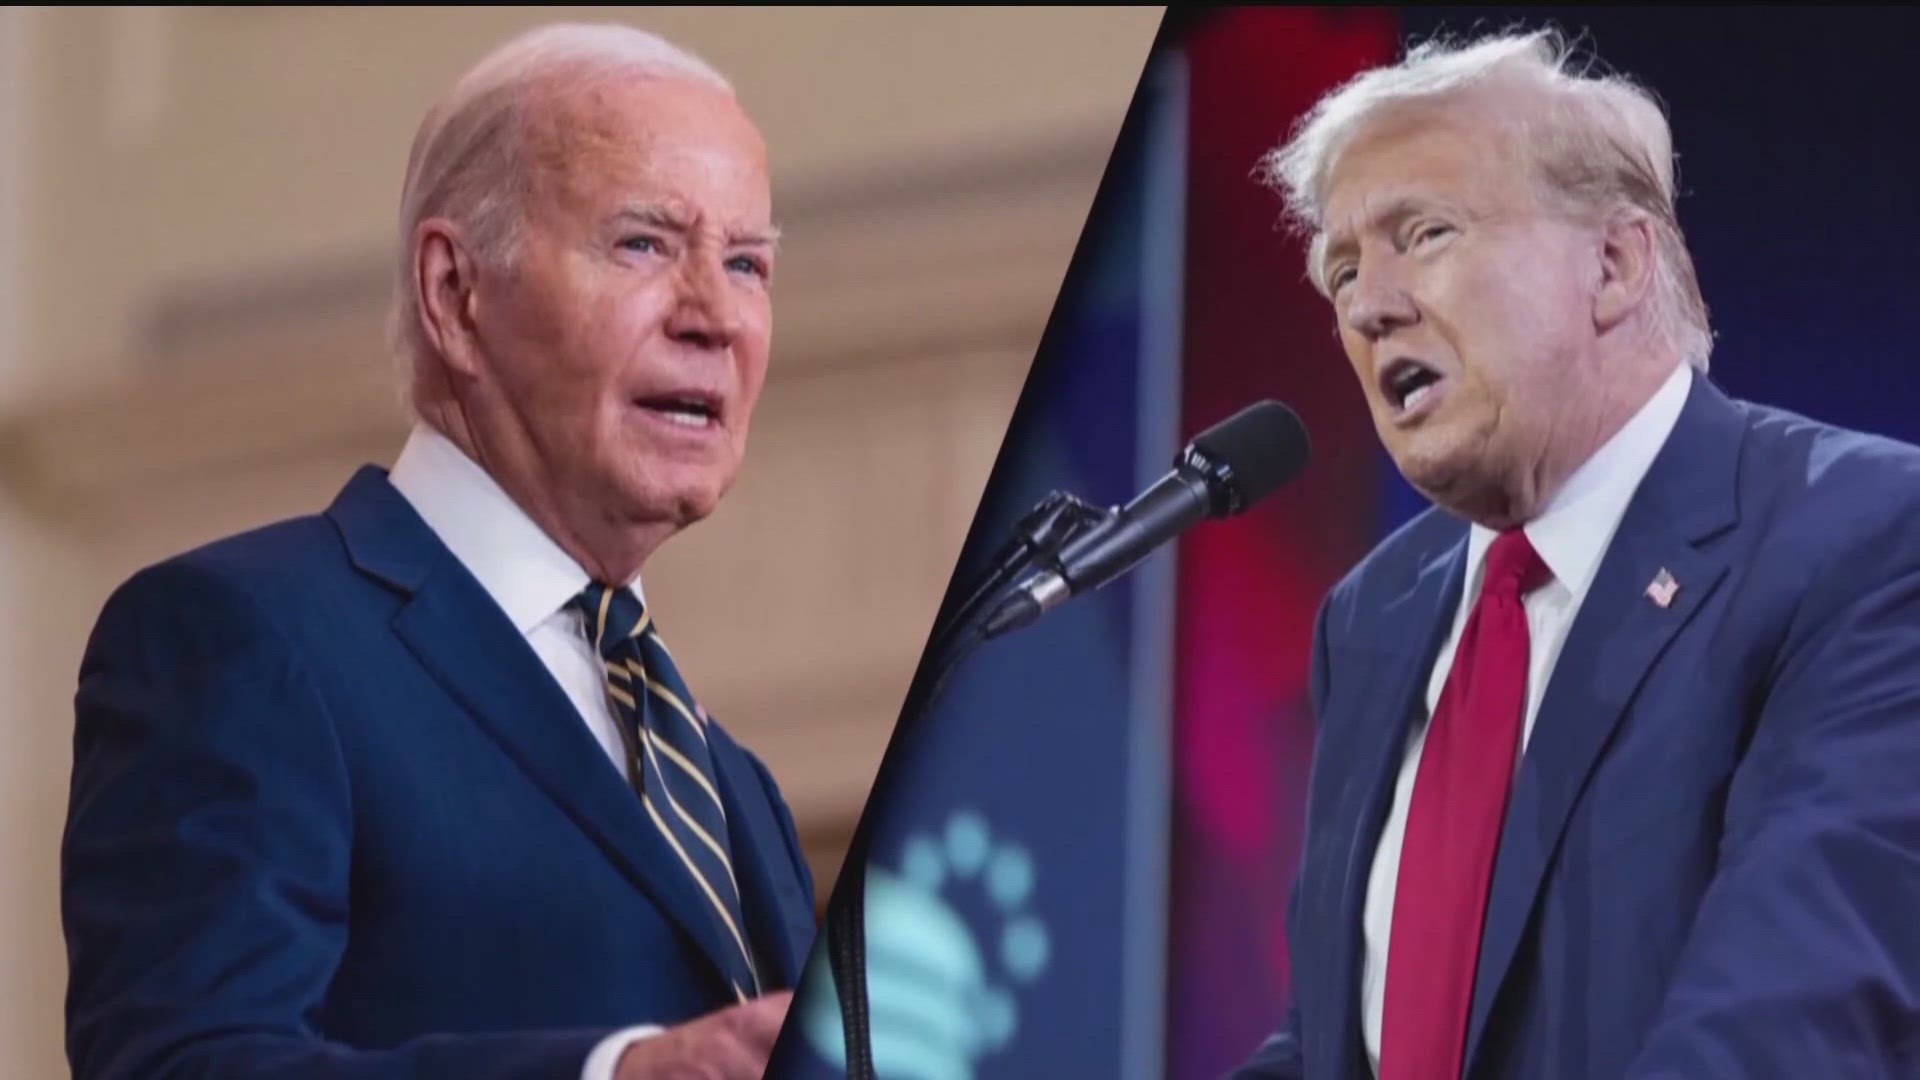 11Alive's Doug Richards explains how backers from both sides are bracing for any potential surprises during Thursday's presidential debate.